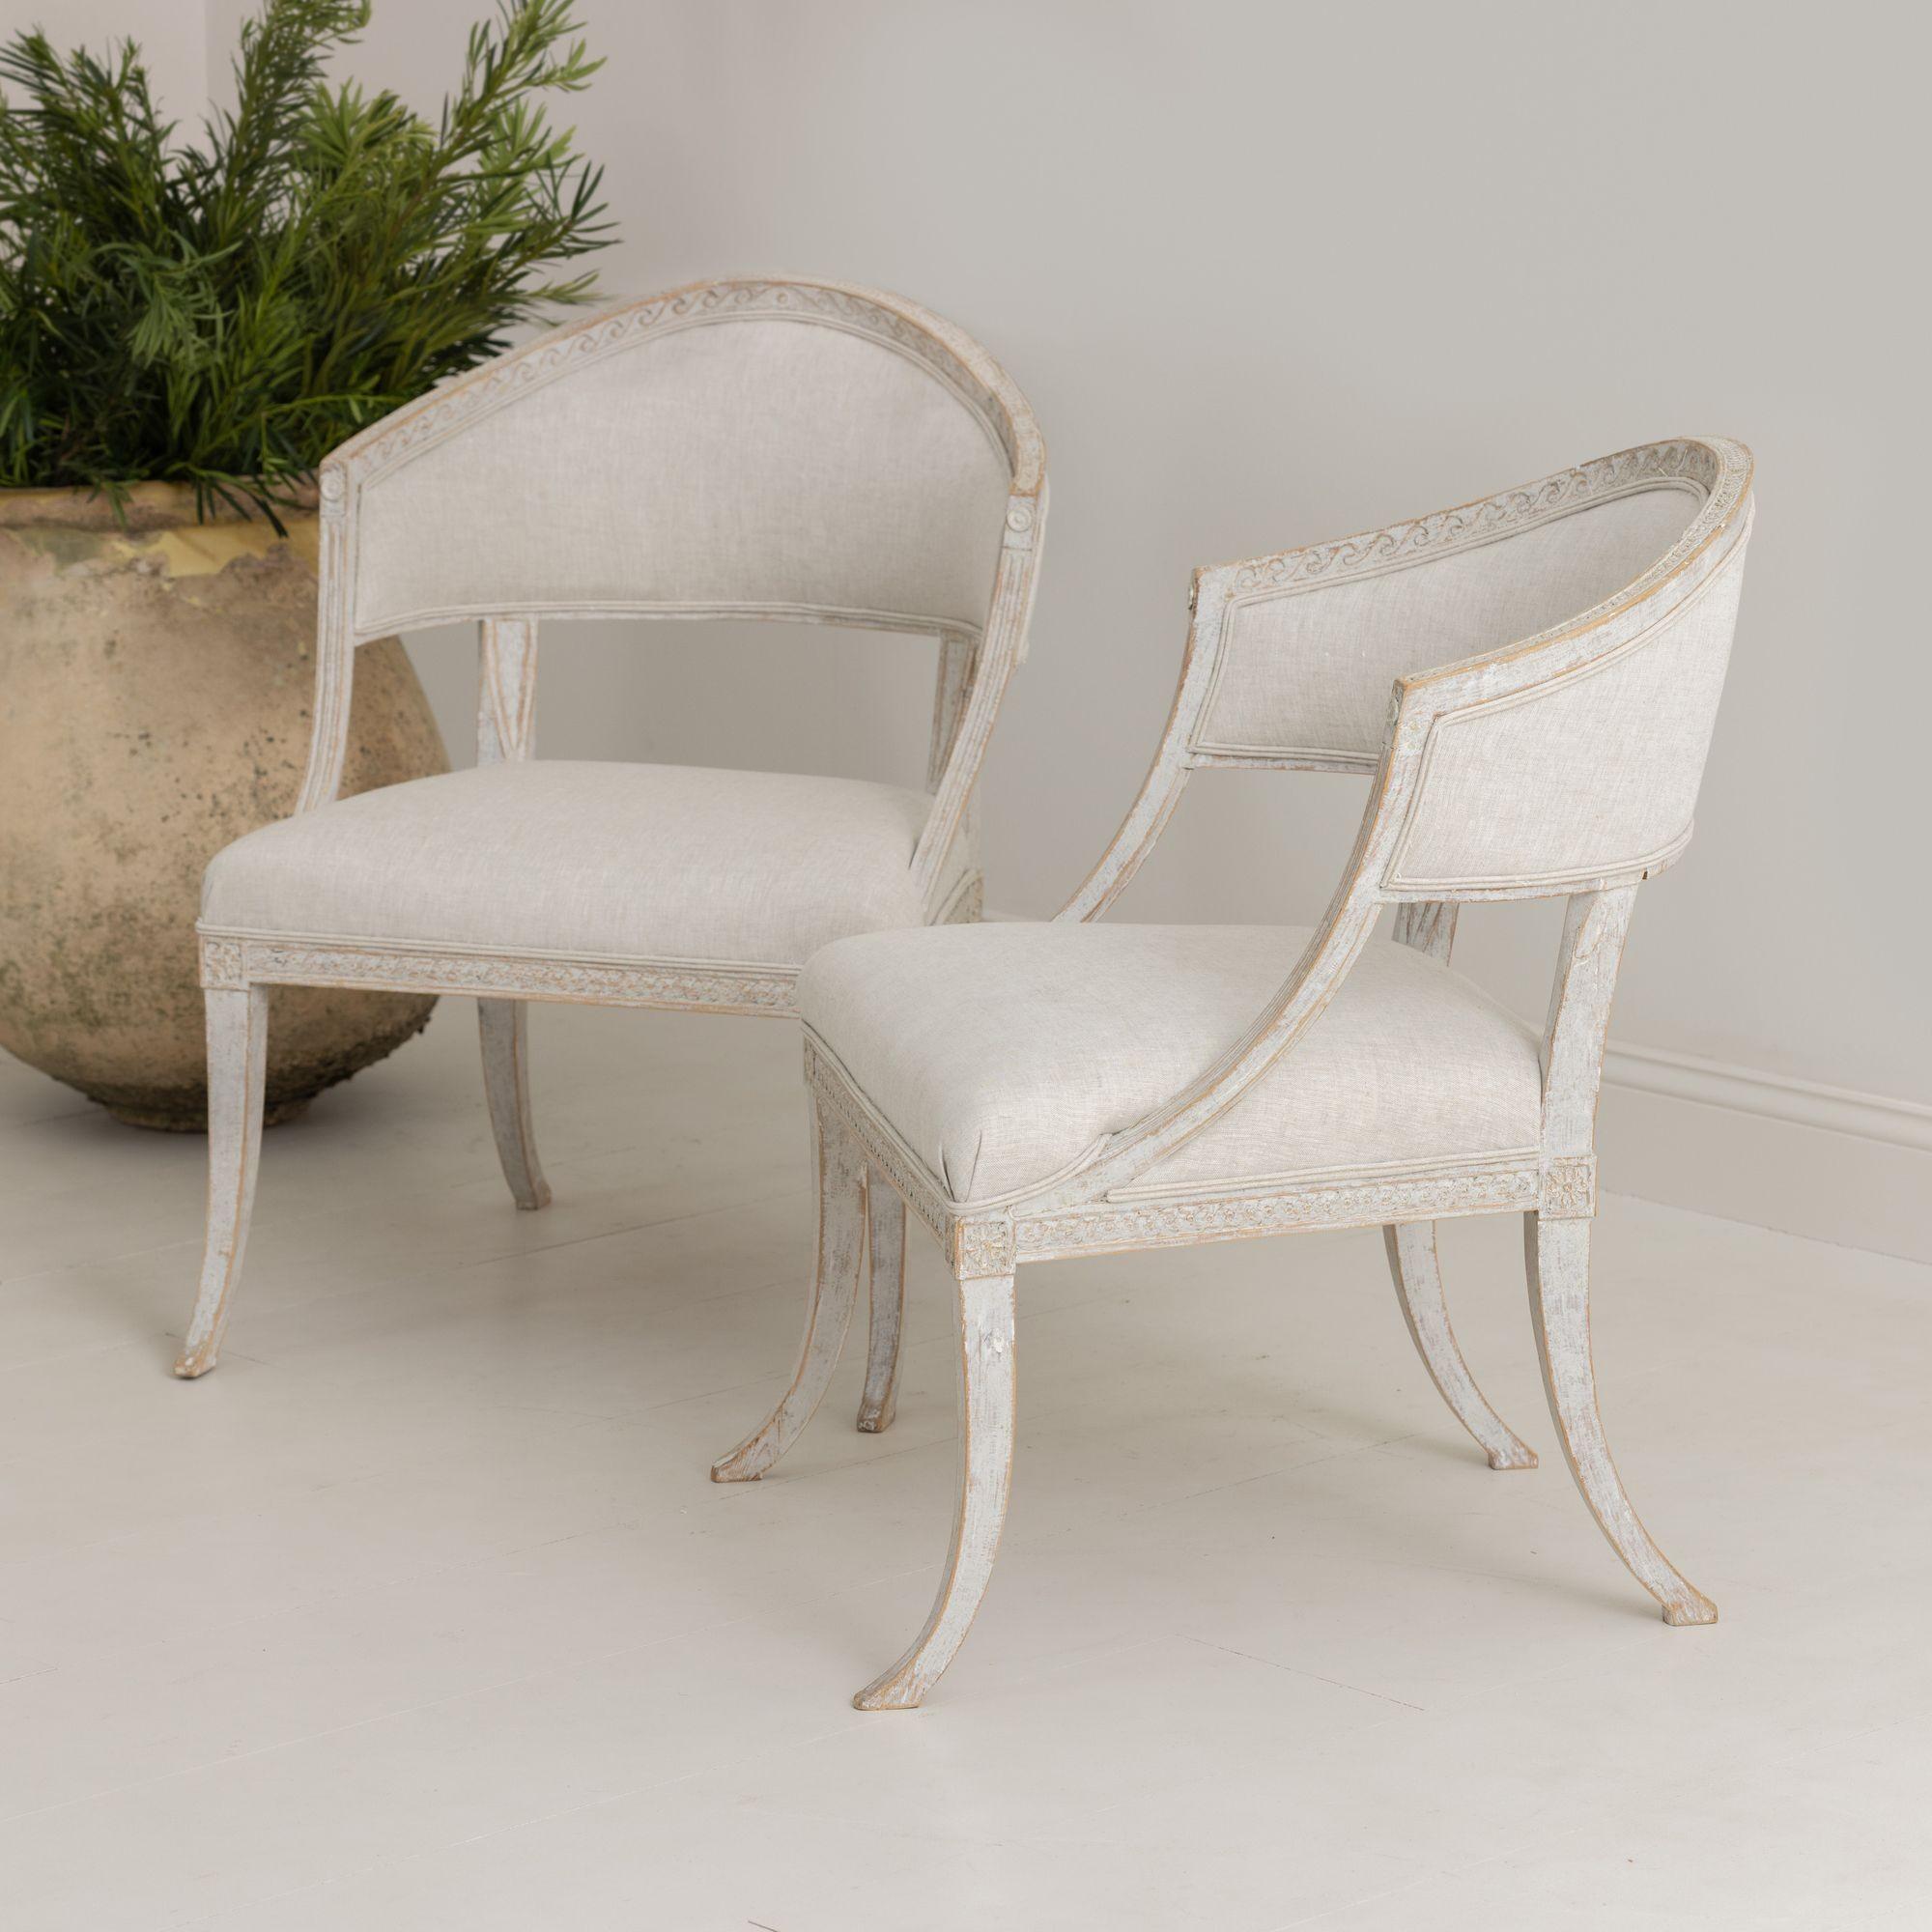 A pair of Swedish chairs with classic sulla, barrel backs in the Gustavian style with wood carved decor, four splayed legs, and newly upholstered in linen.


We offer expedited, fully-insured, custom packaged / crated, global shipping, including